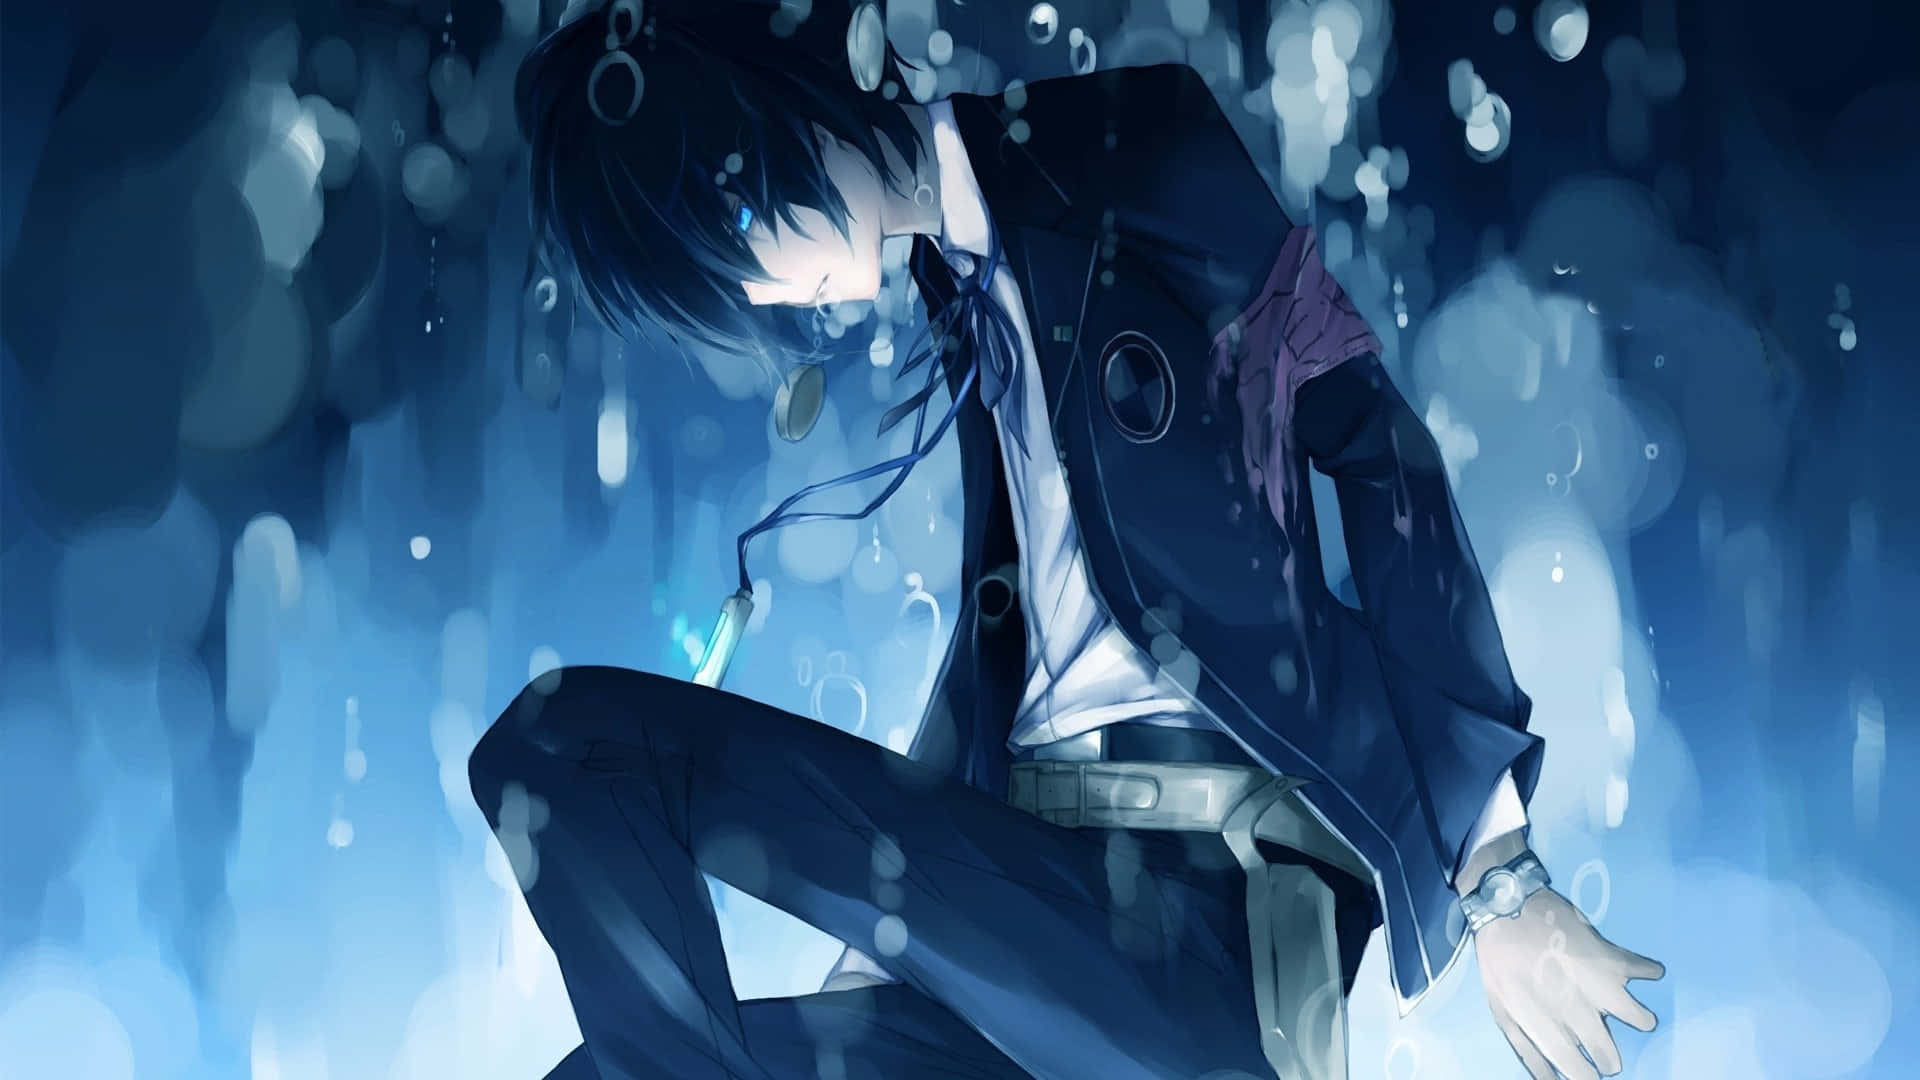 A Somber Reflection: Anime Character in Despair Wallpaper